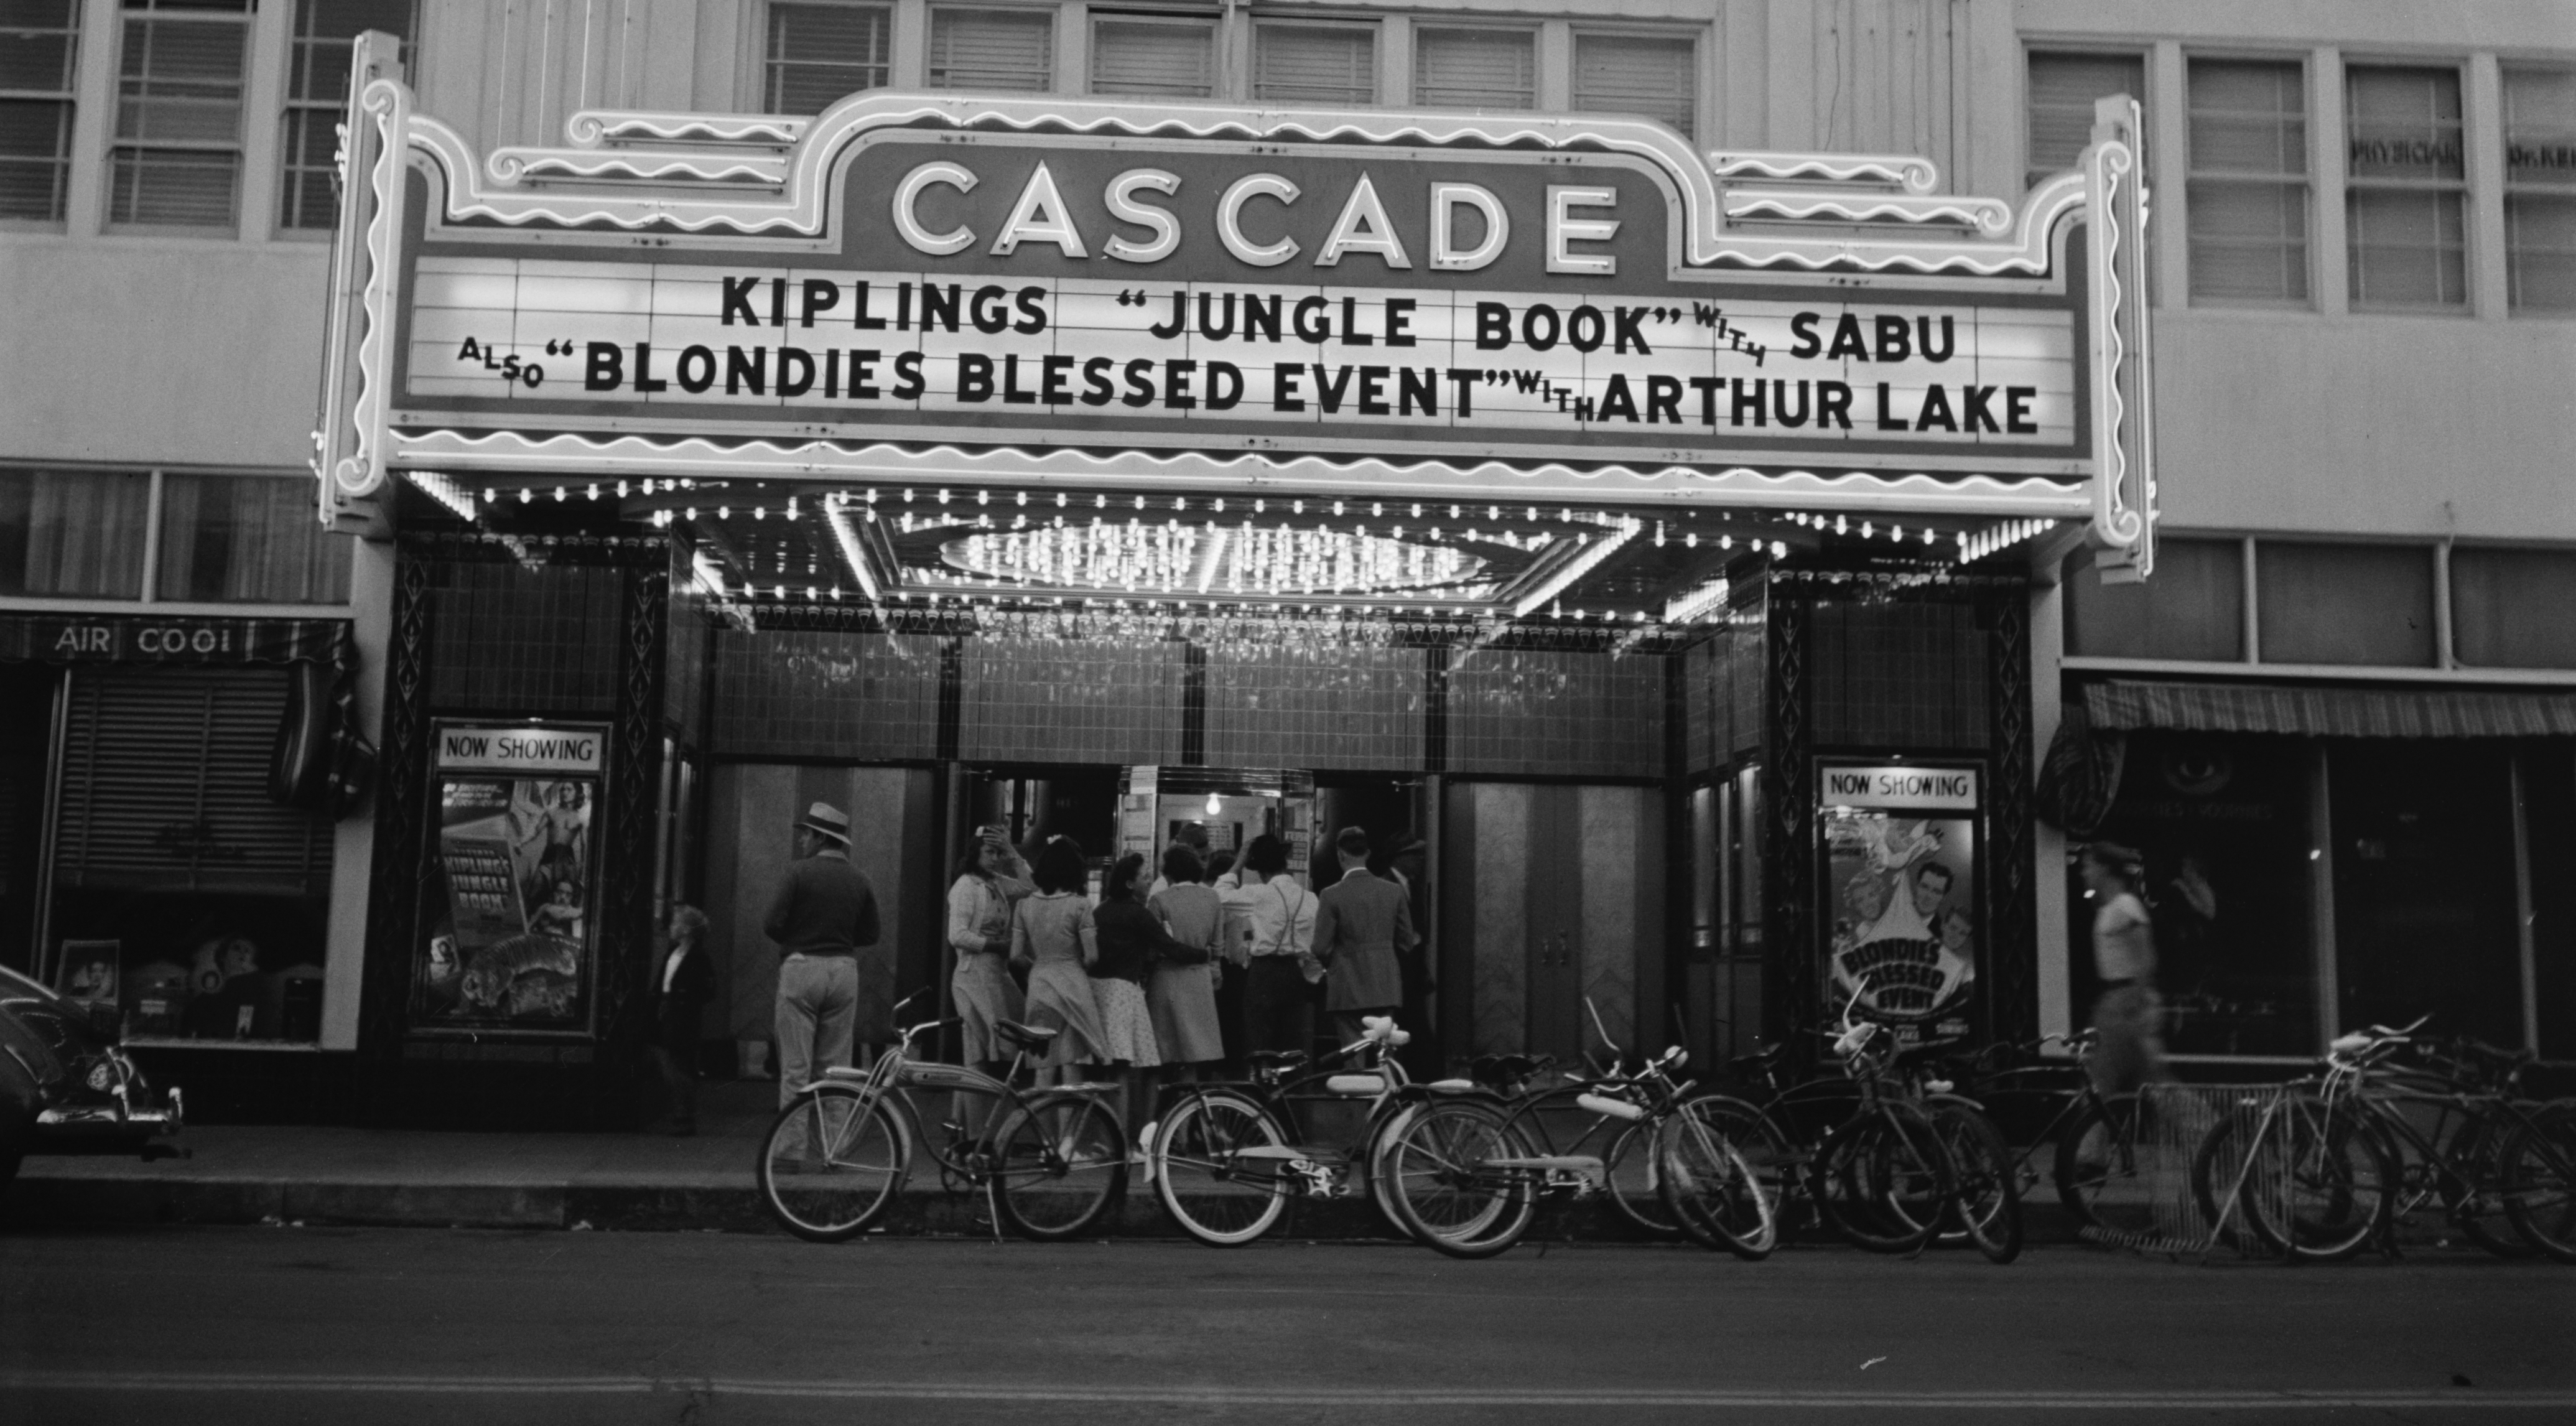 A well-used bike corral directly in front of the Cascade Theater in 1941.